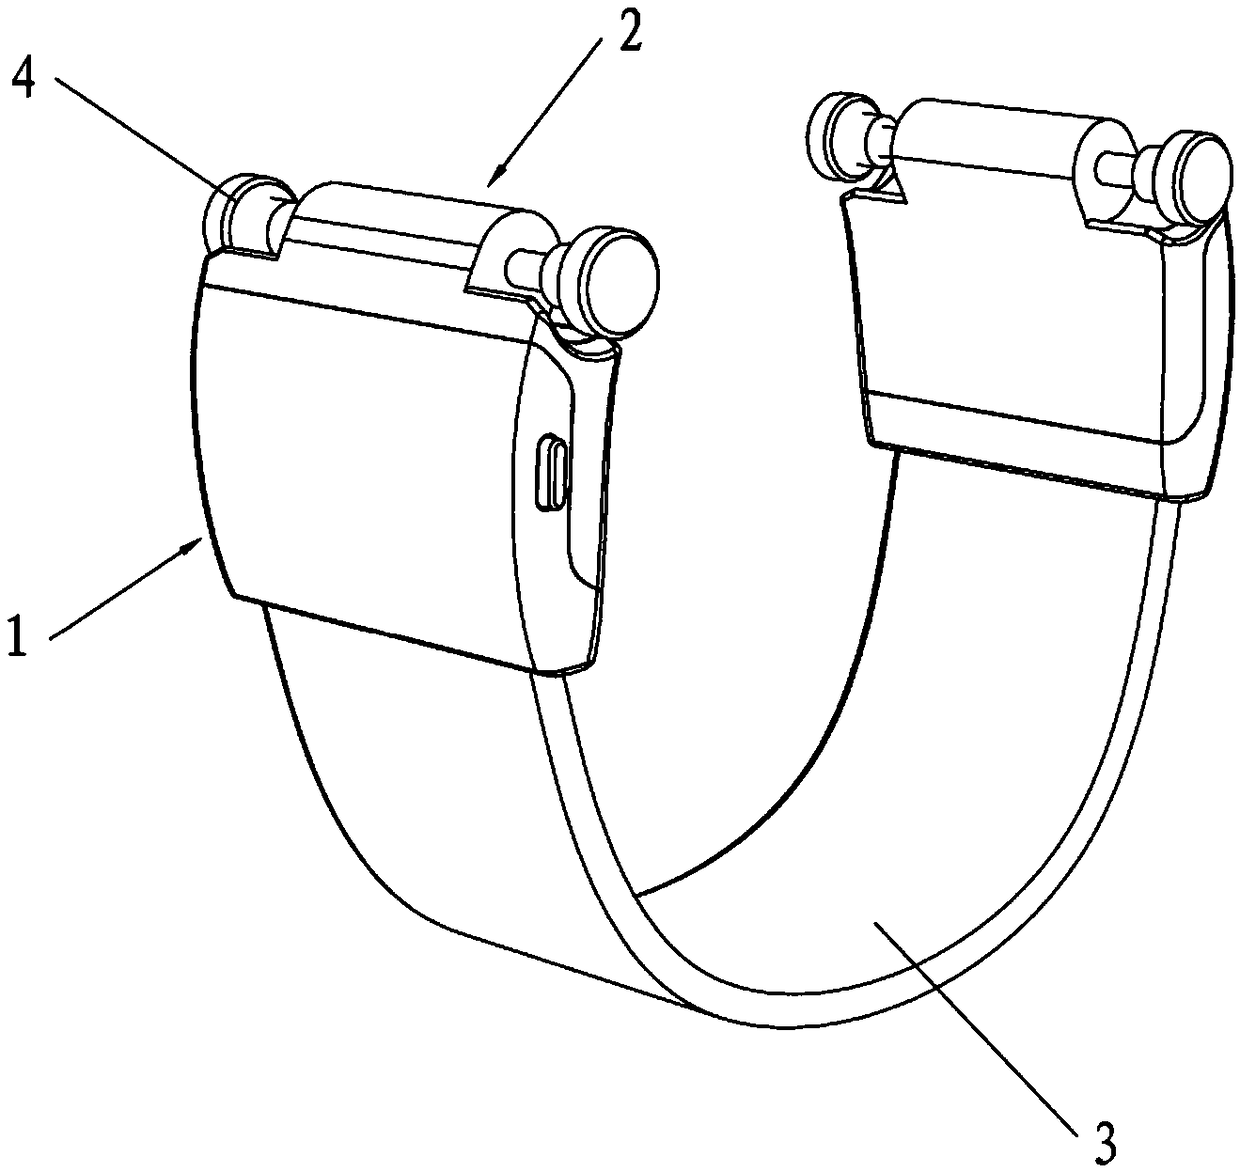 Watch lug connector, watch strap and wearing equipment